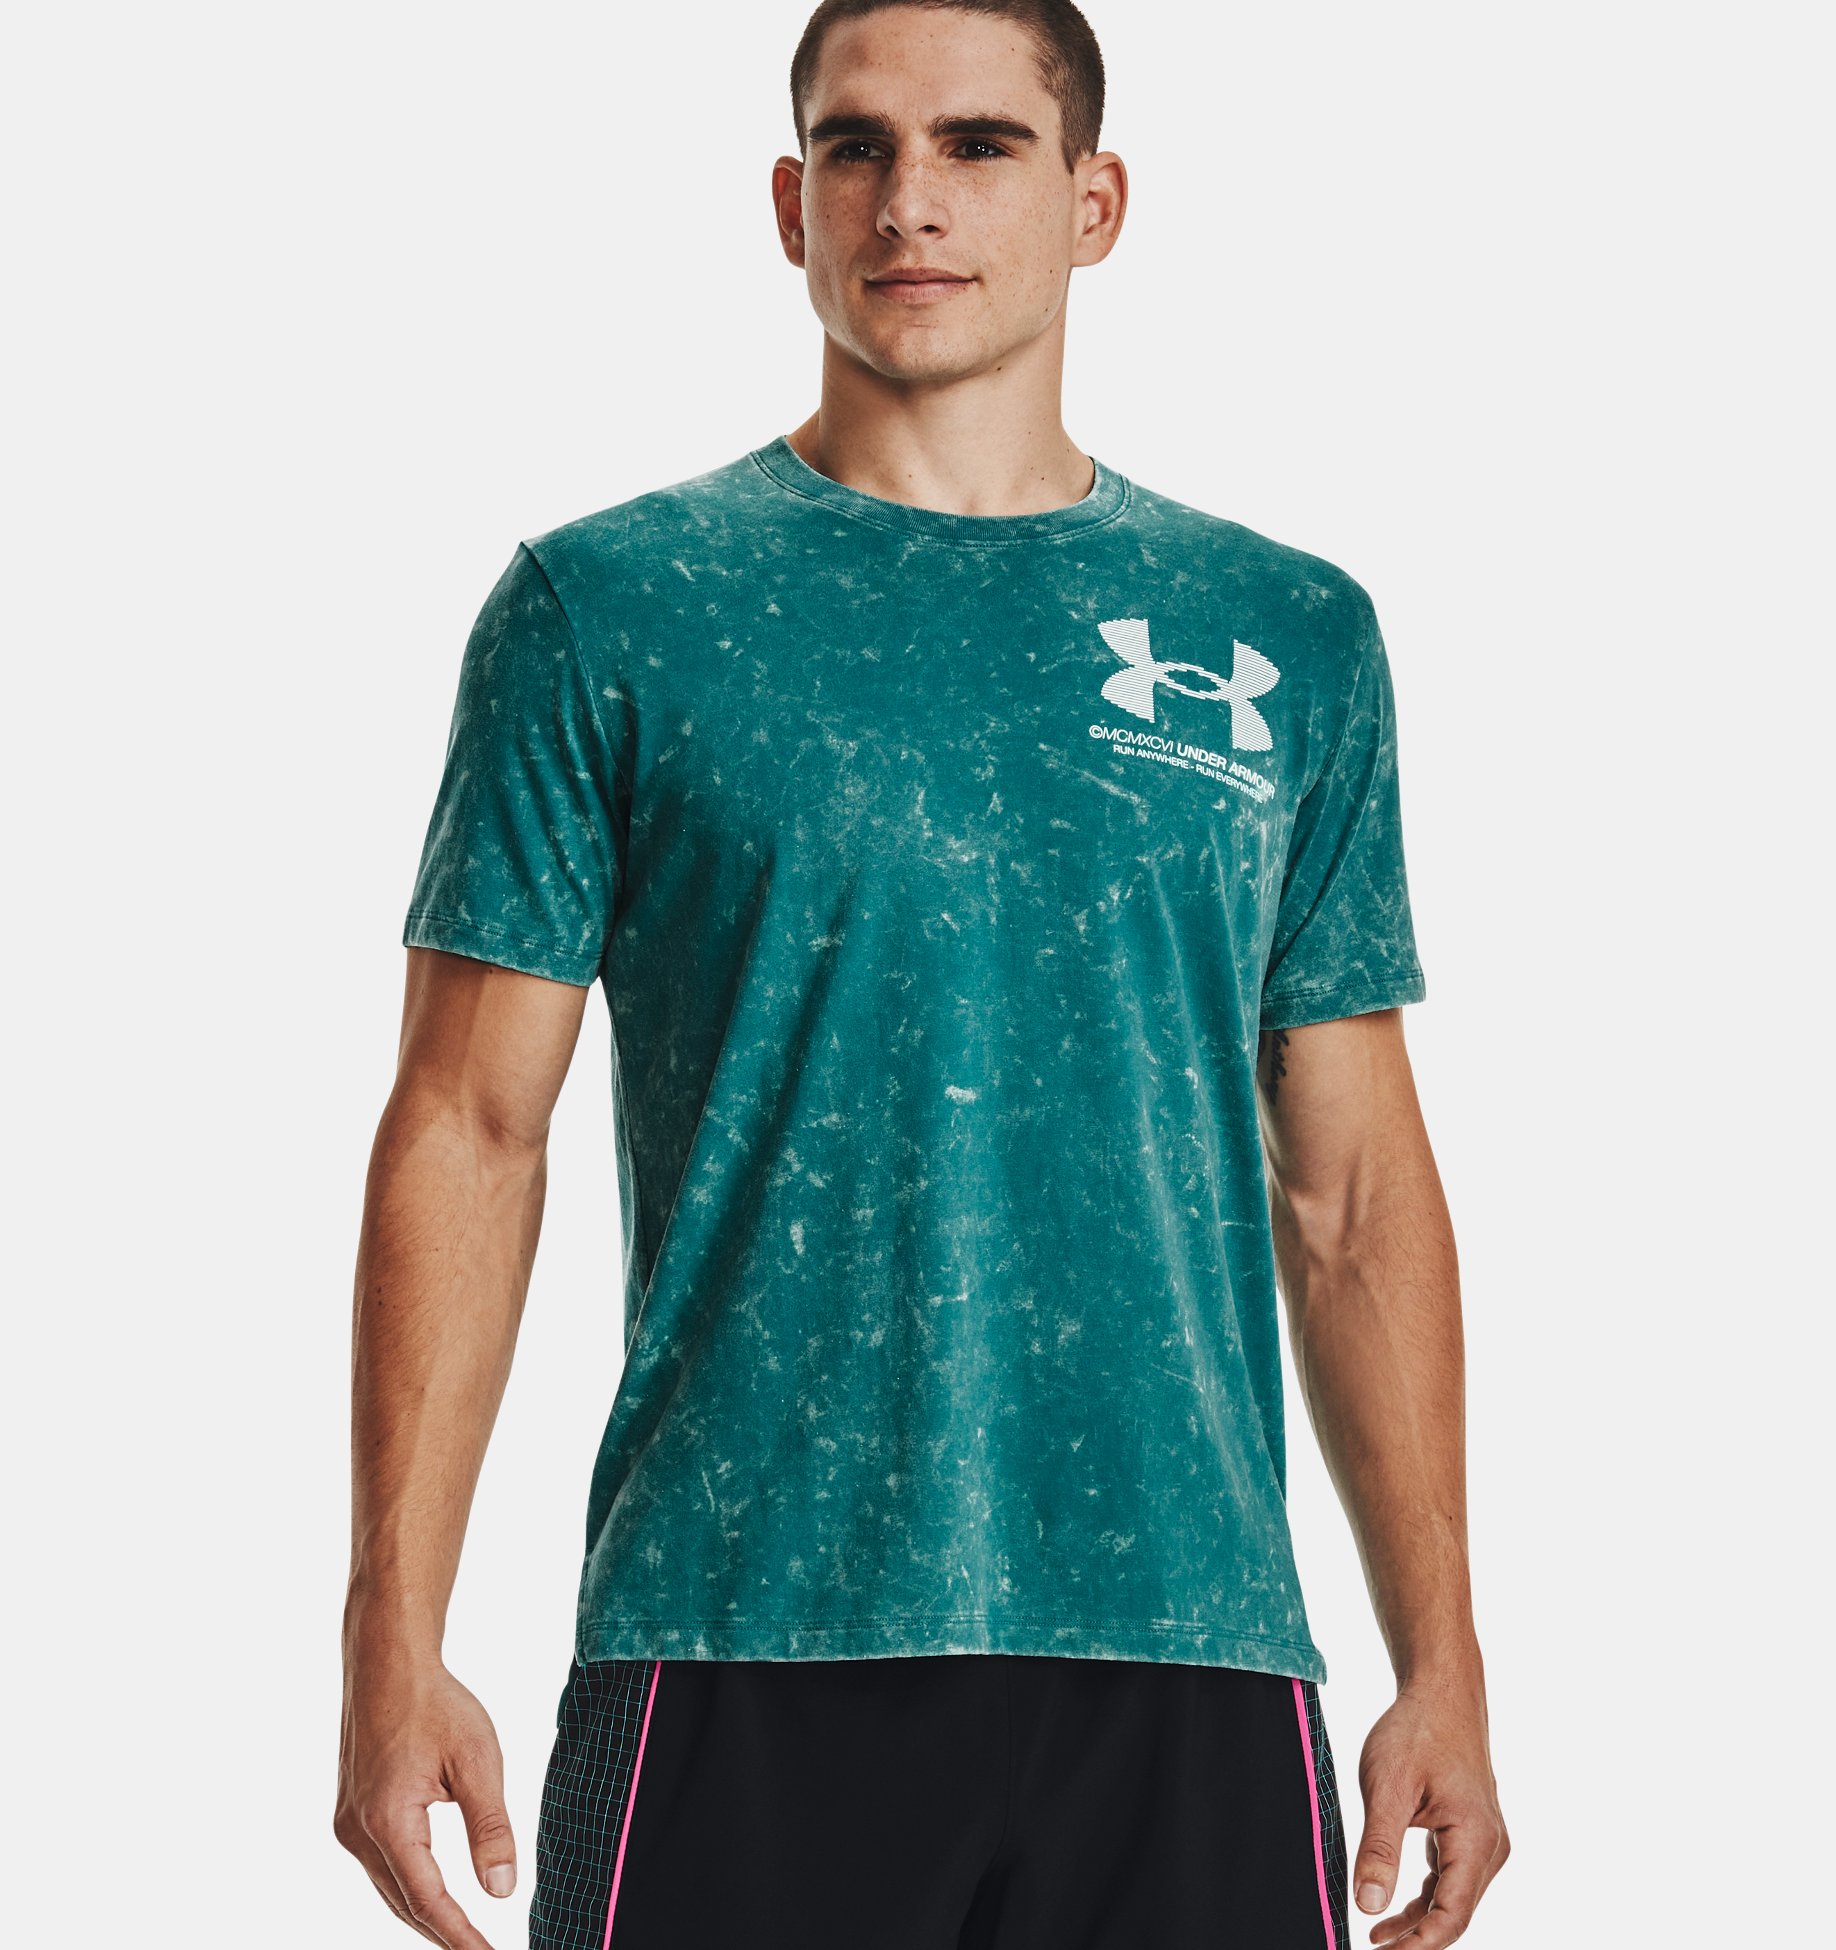 Visiter la boutique Under ArmourUnder Armour CoolSwitch Run LS T-Shirt Course à Pied SS17 